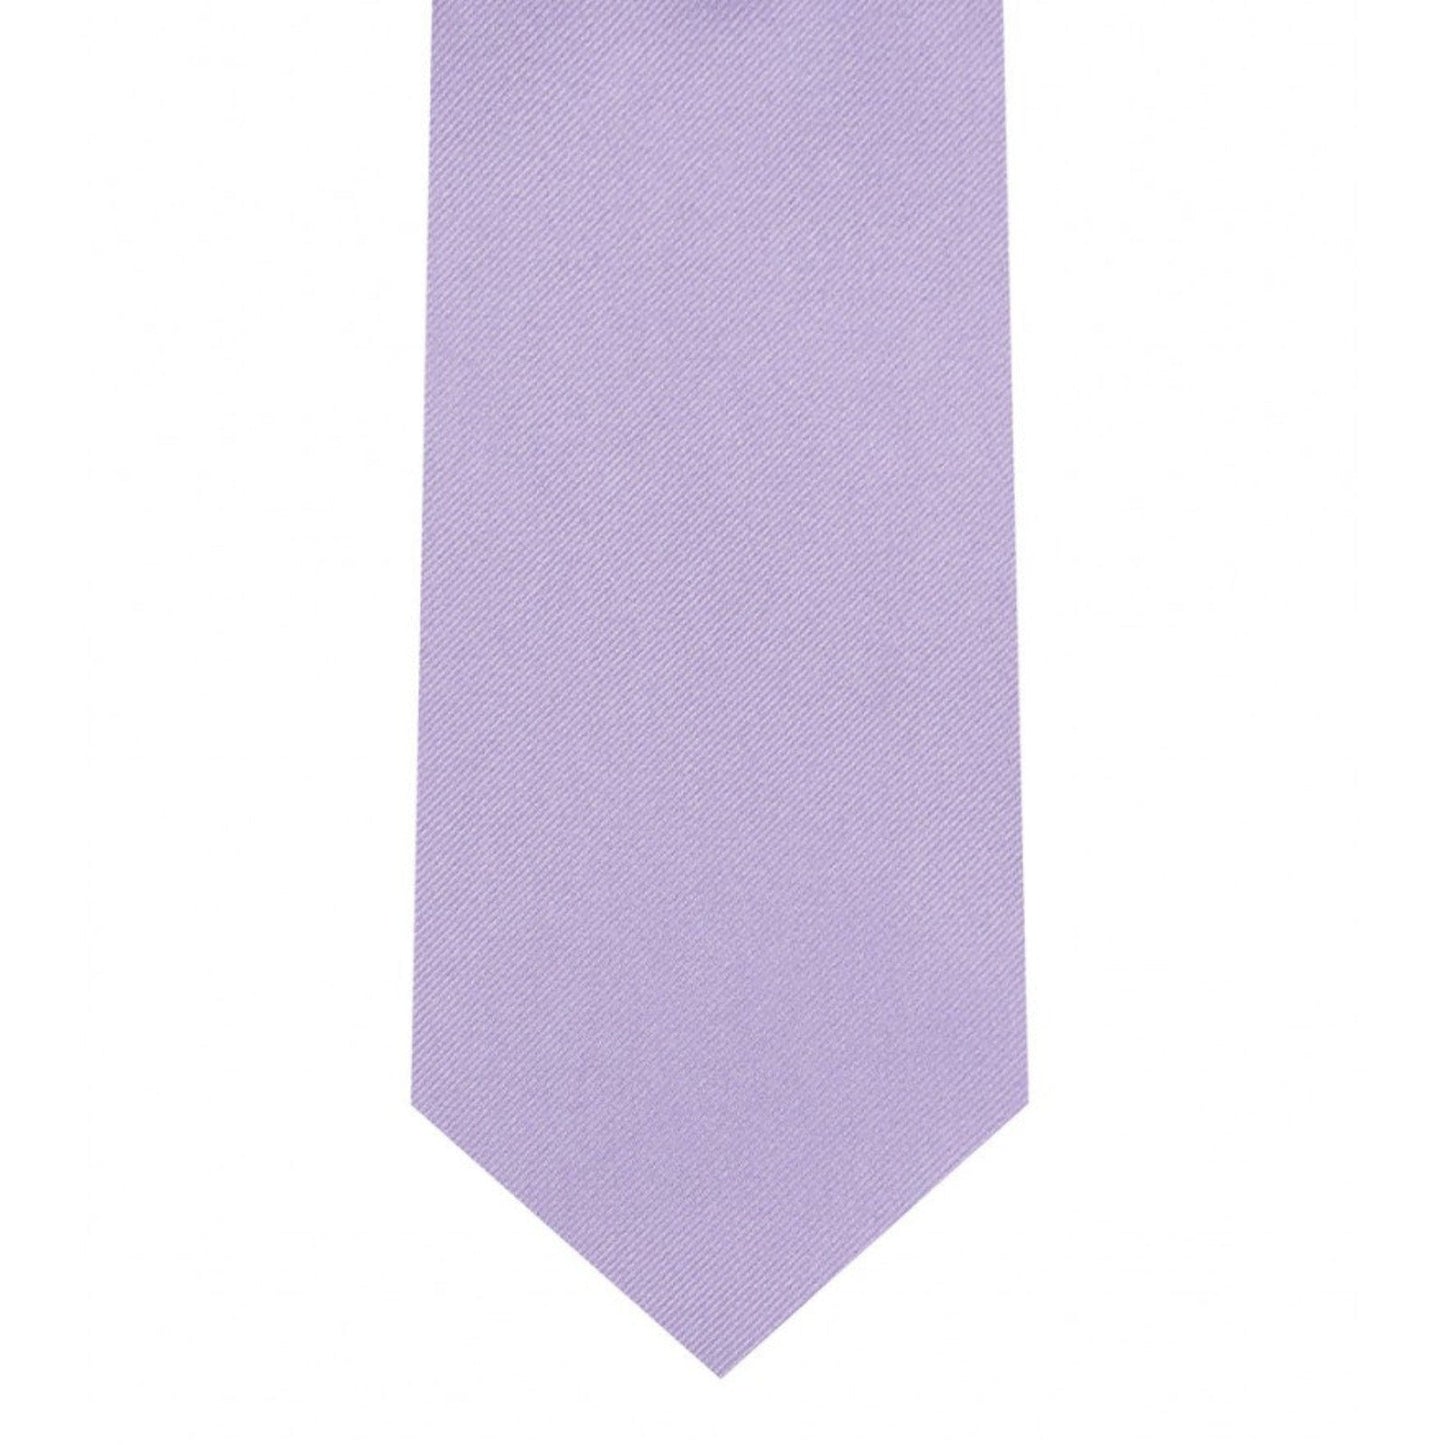 Classic Lilac Tie Skinny width 2.75 inches With Matching Pocket Square | KCT Menswear